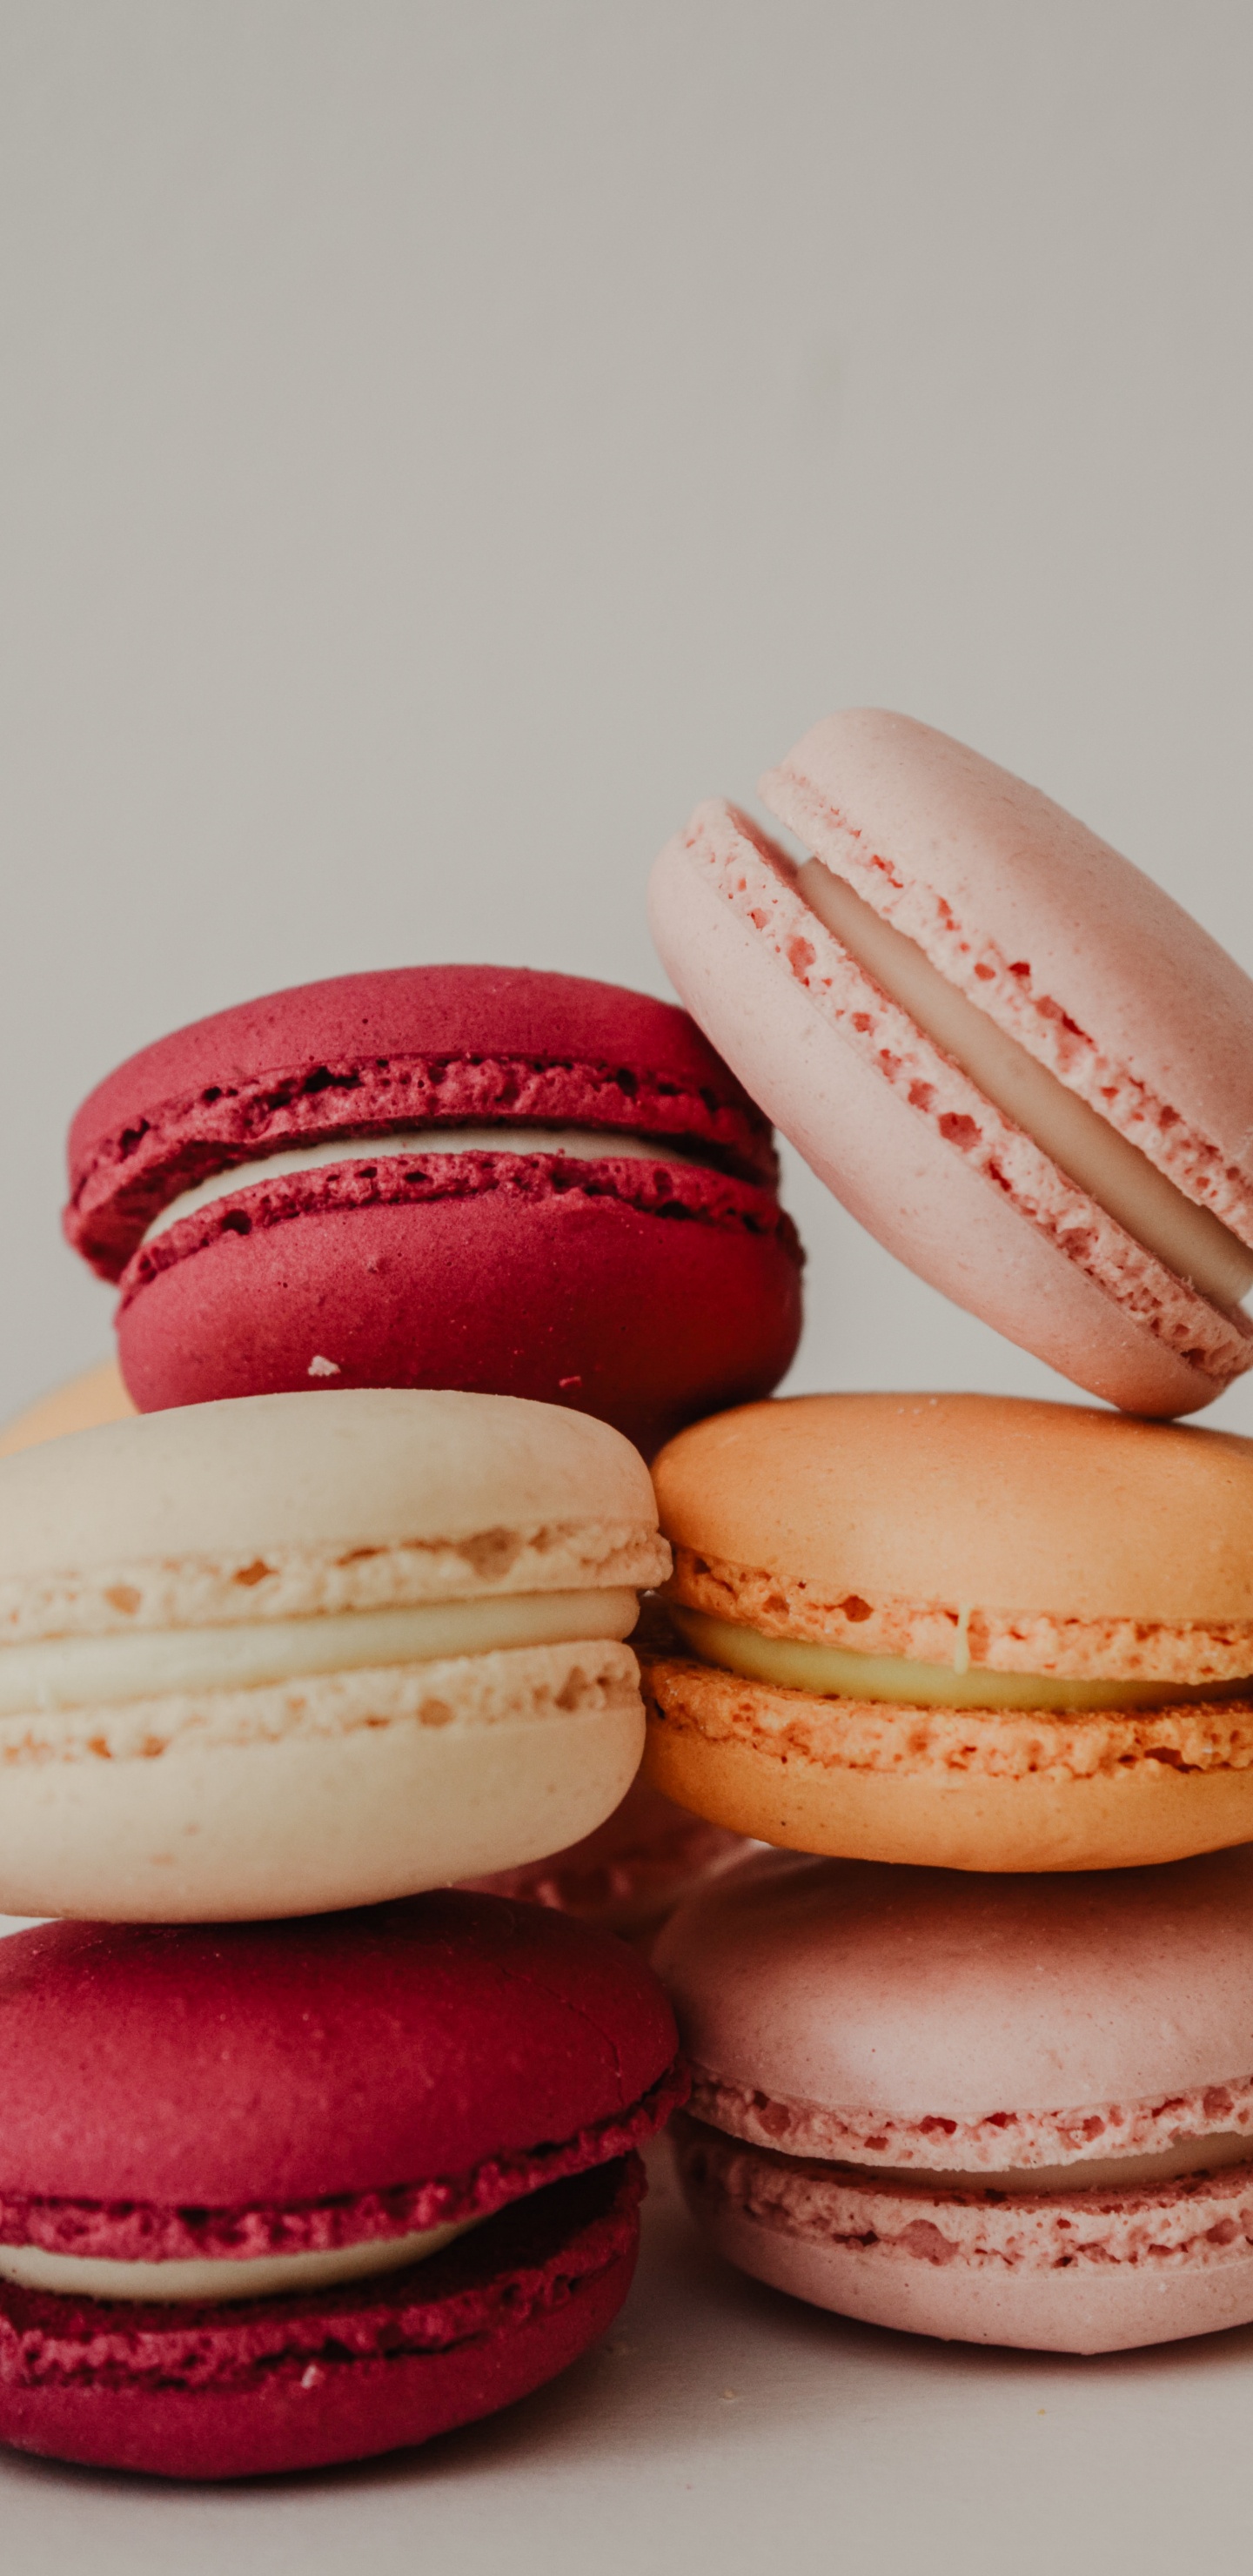 3 Pink and White Macaroons. Wallpaper in 1440x2960 Resolution